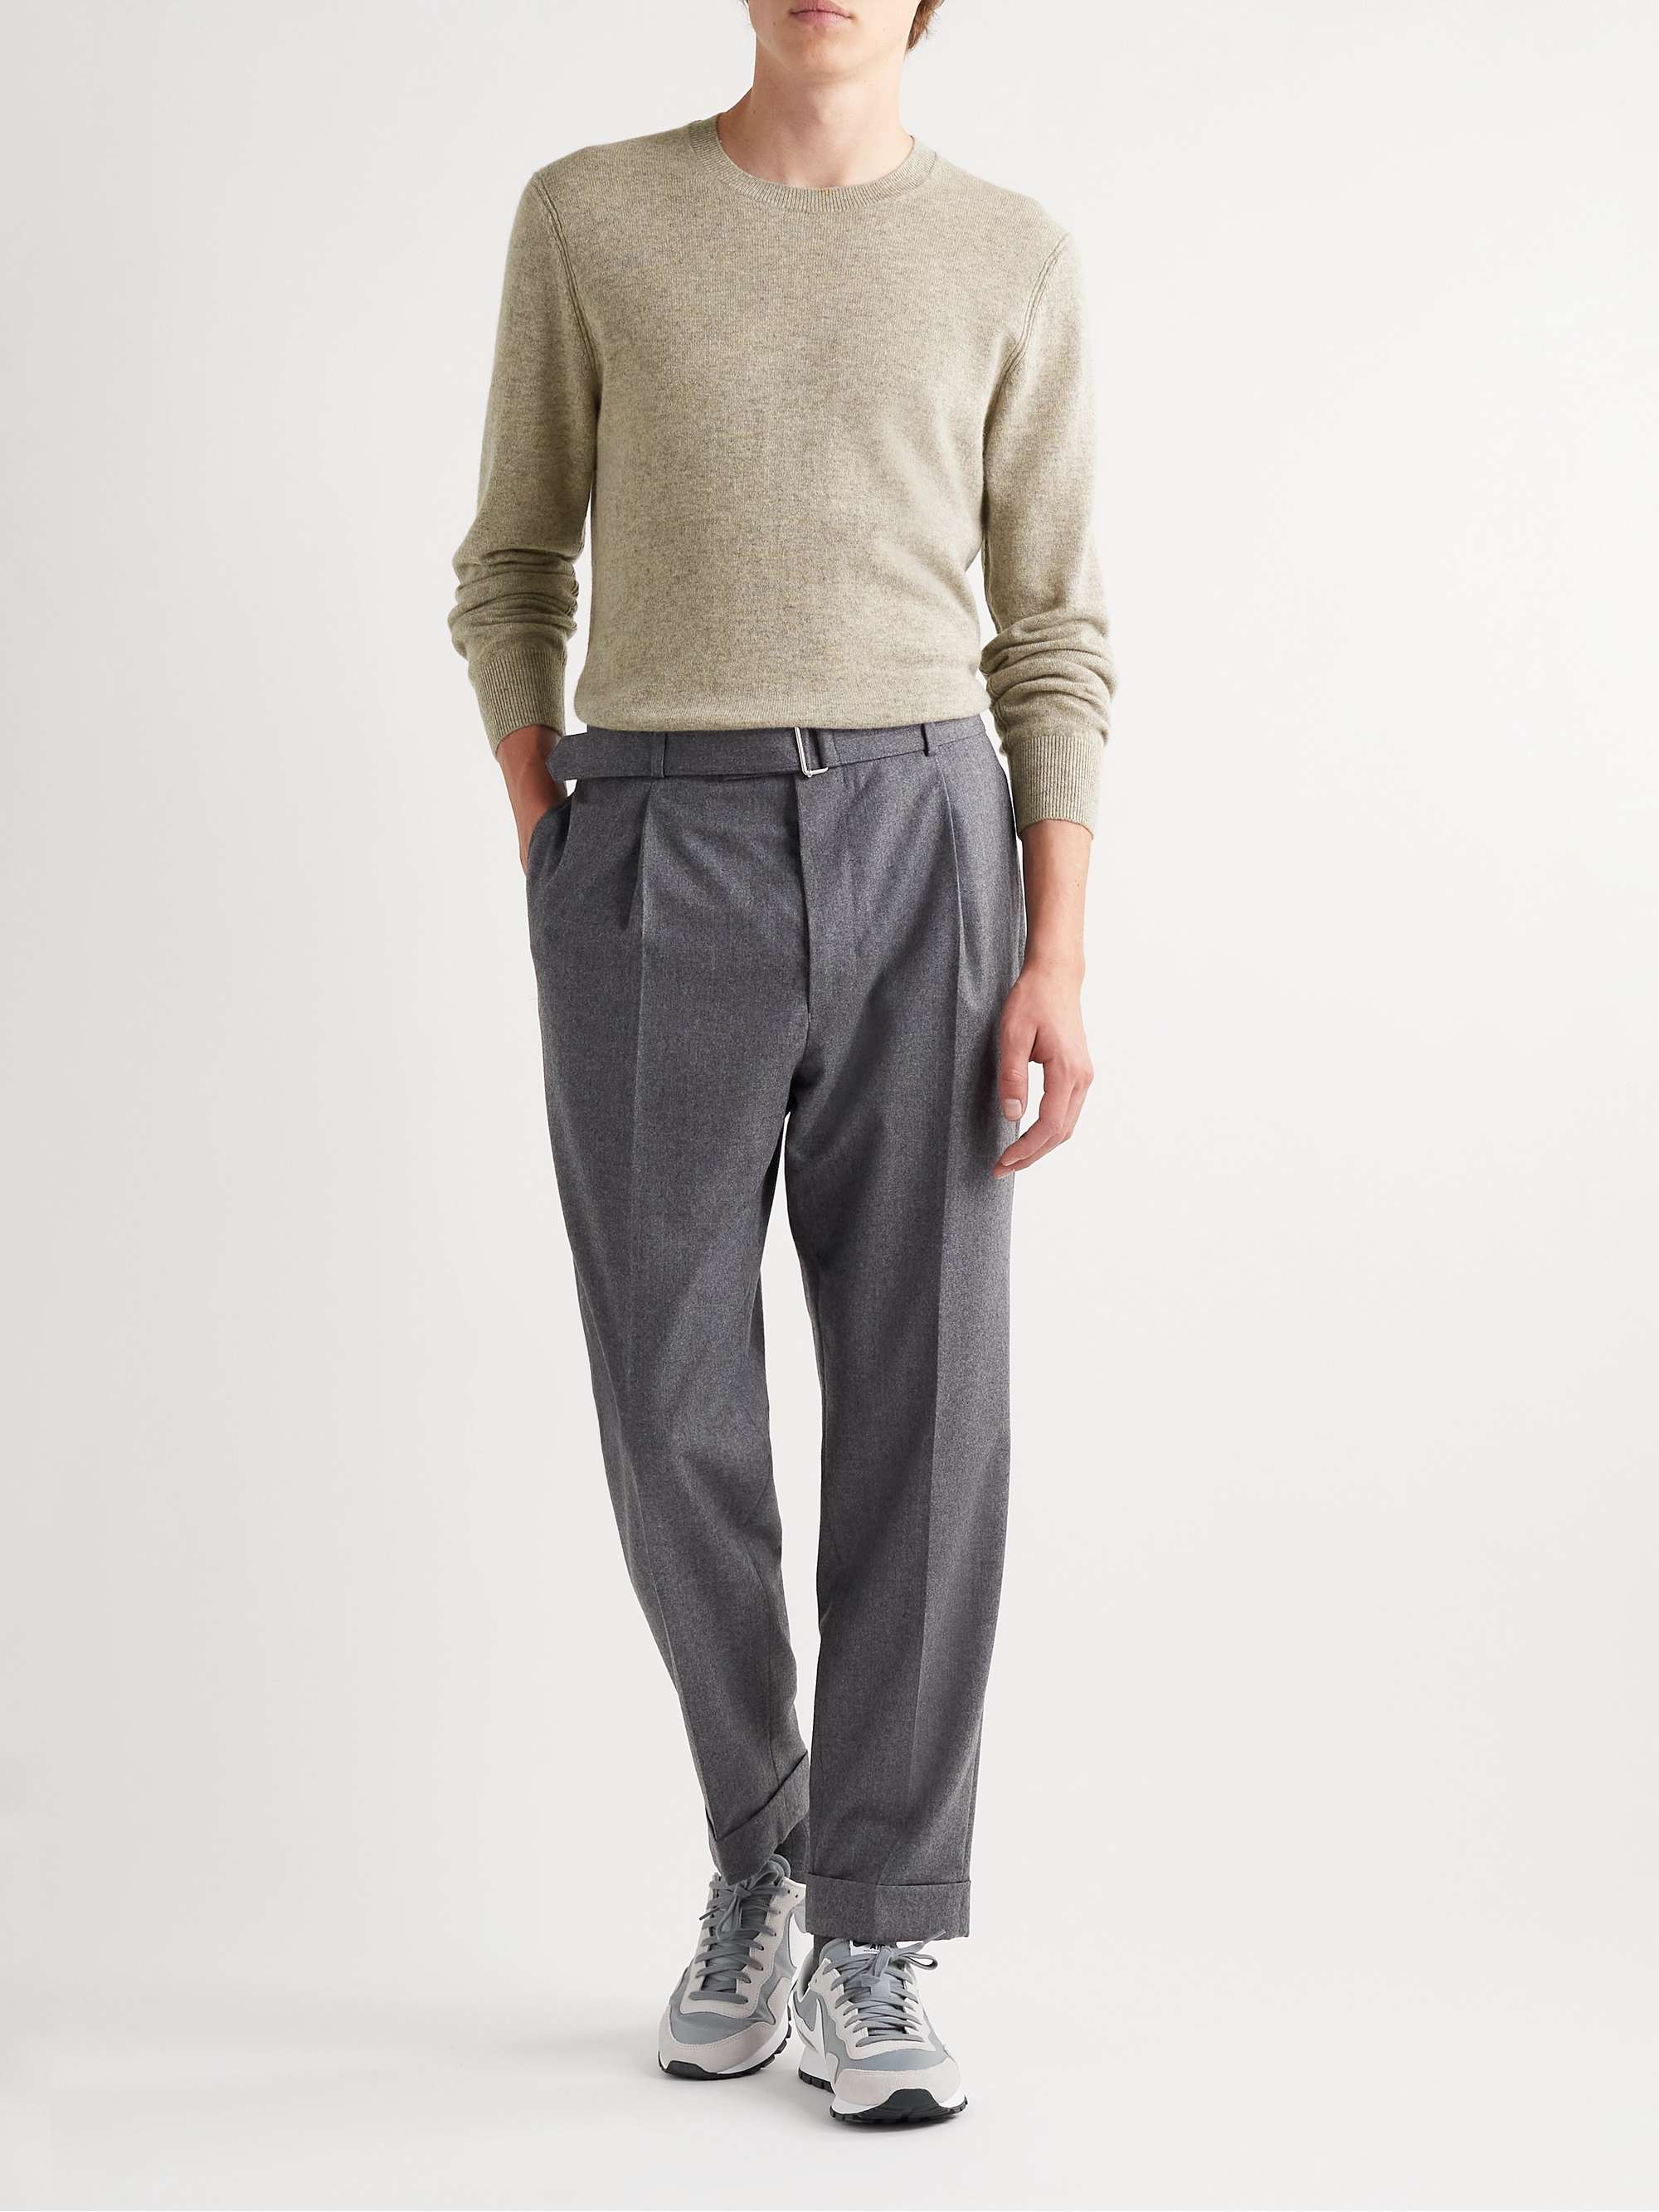 CLUB MONACO Recycled Cashmere Sweater